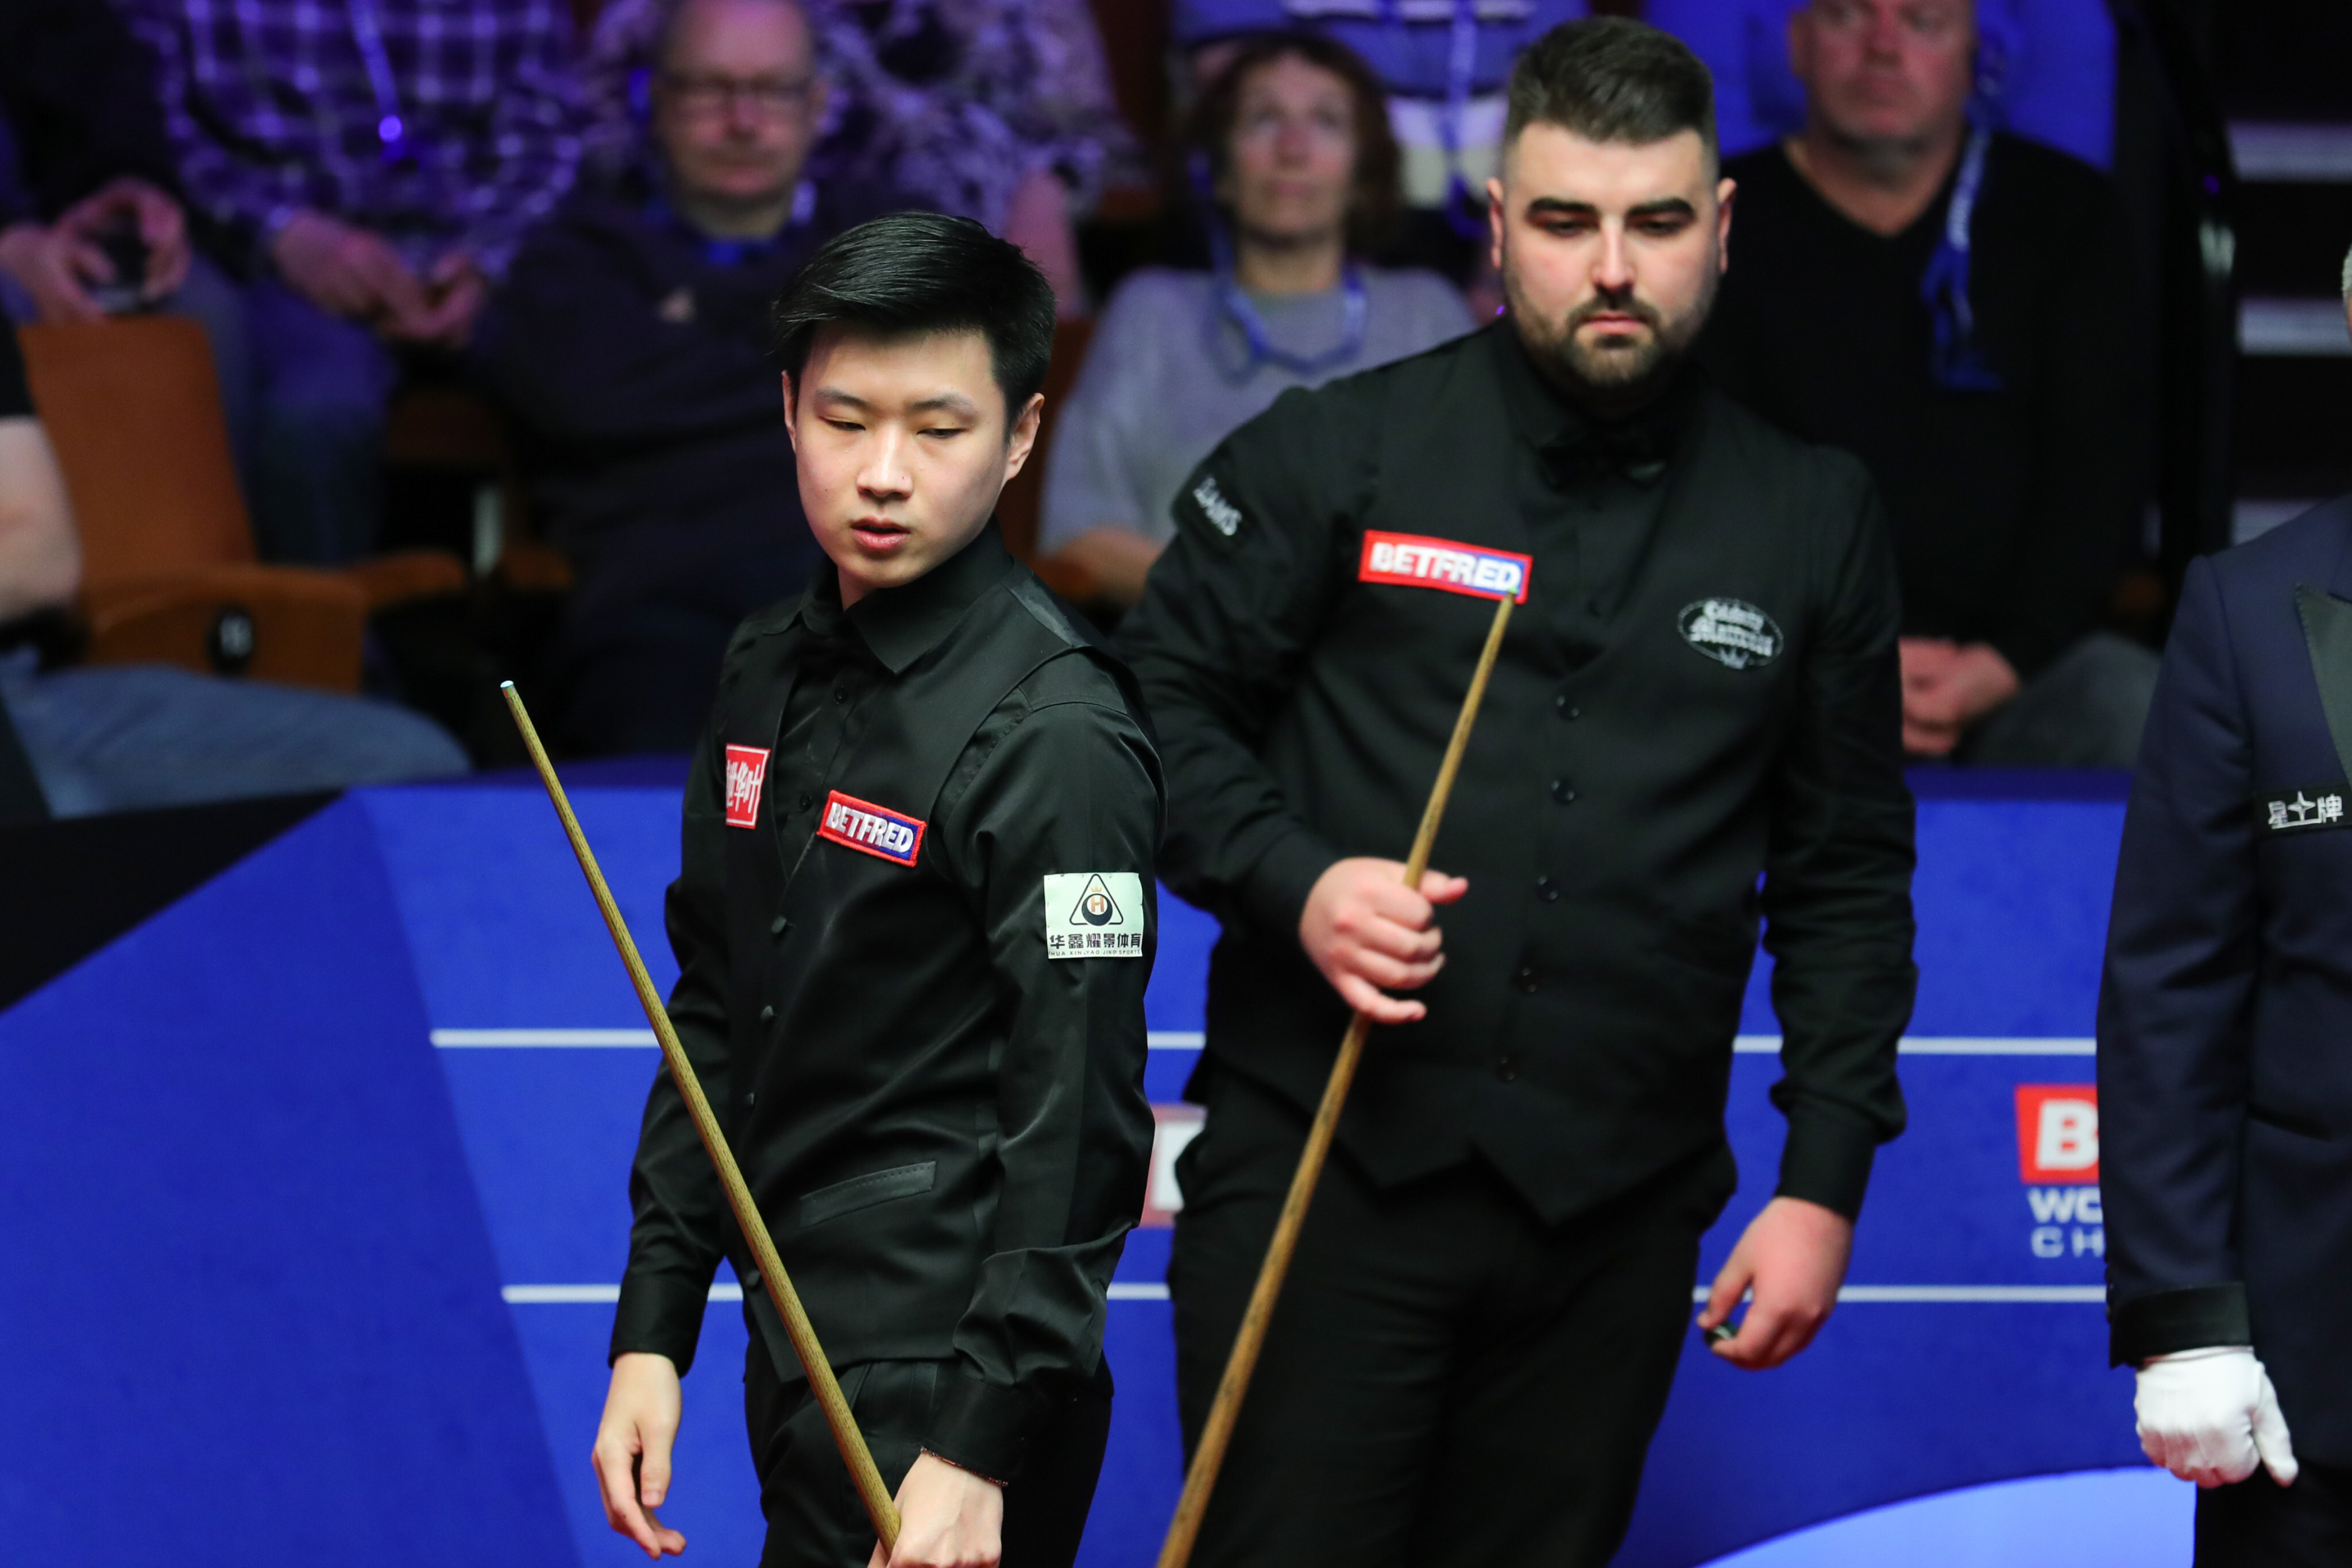 Zhao Xintong (left) of China and Jamie Clarke of Wales compete during their first-round match at the 2022 World Snooker Championship in Sheffield. Photo: Zhai Zheng/Xinhua